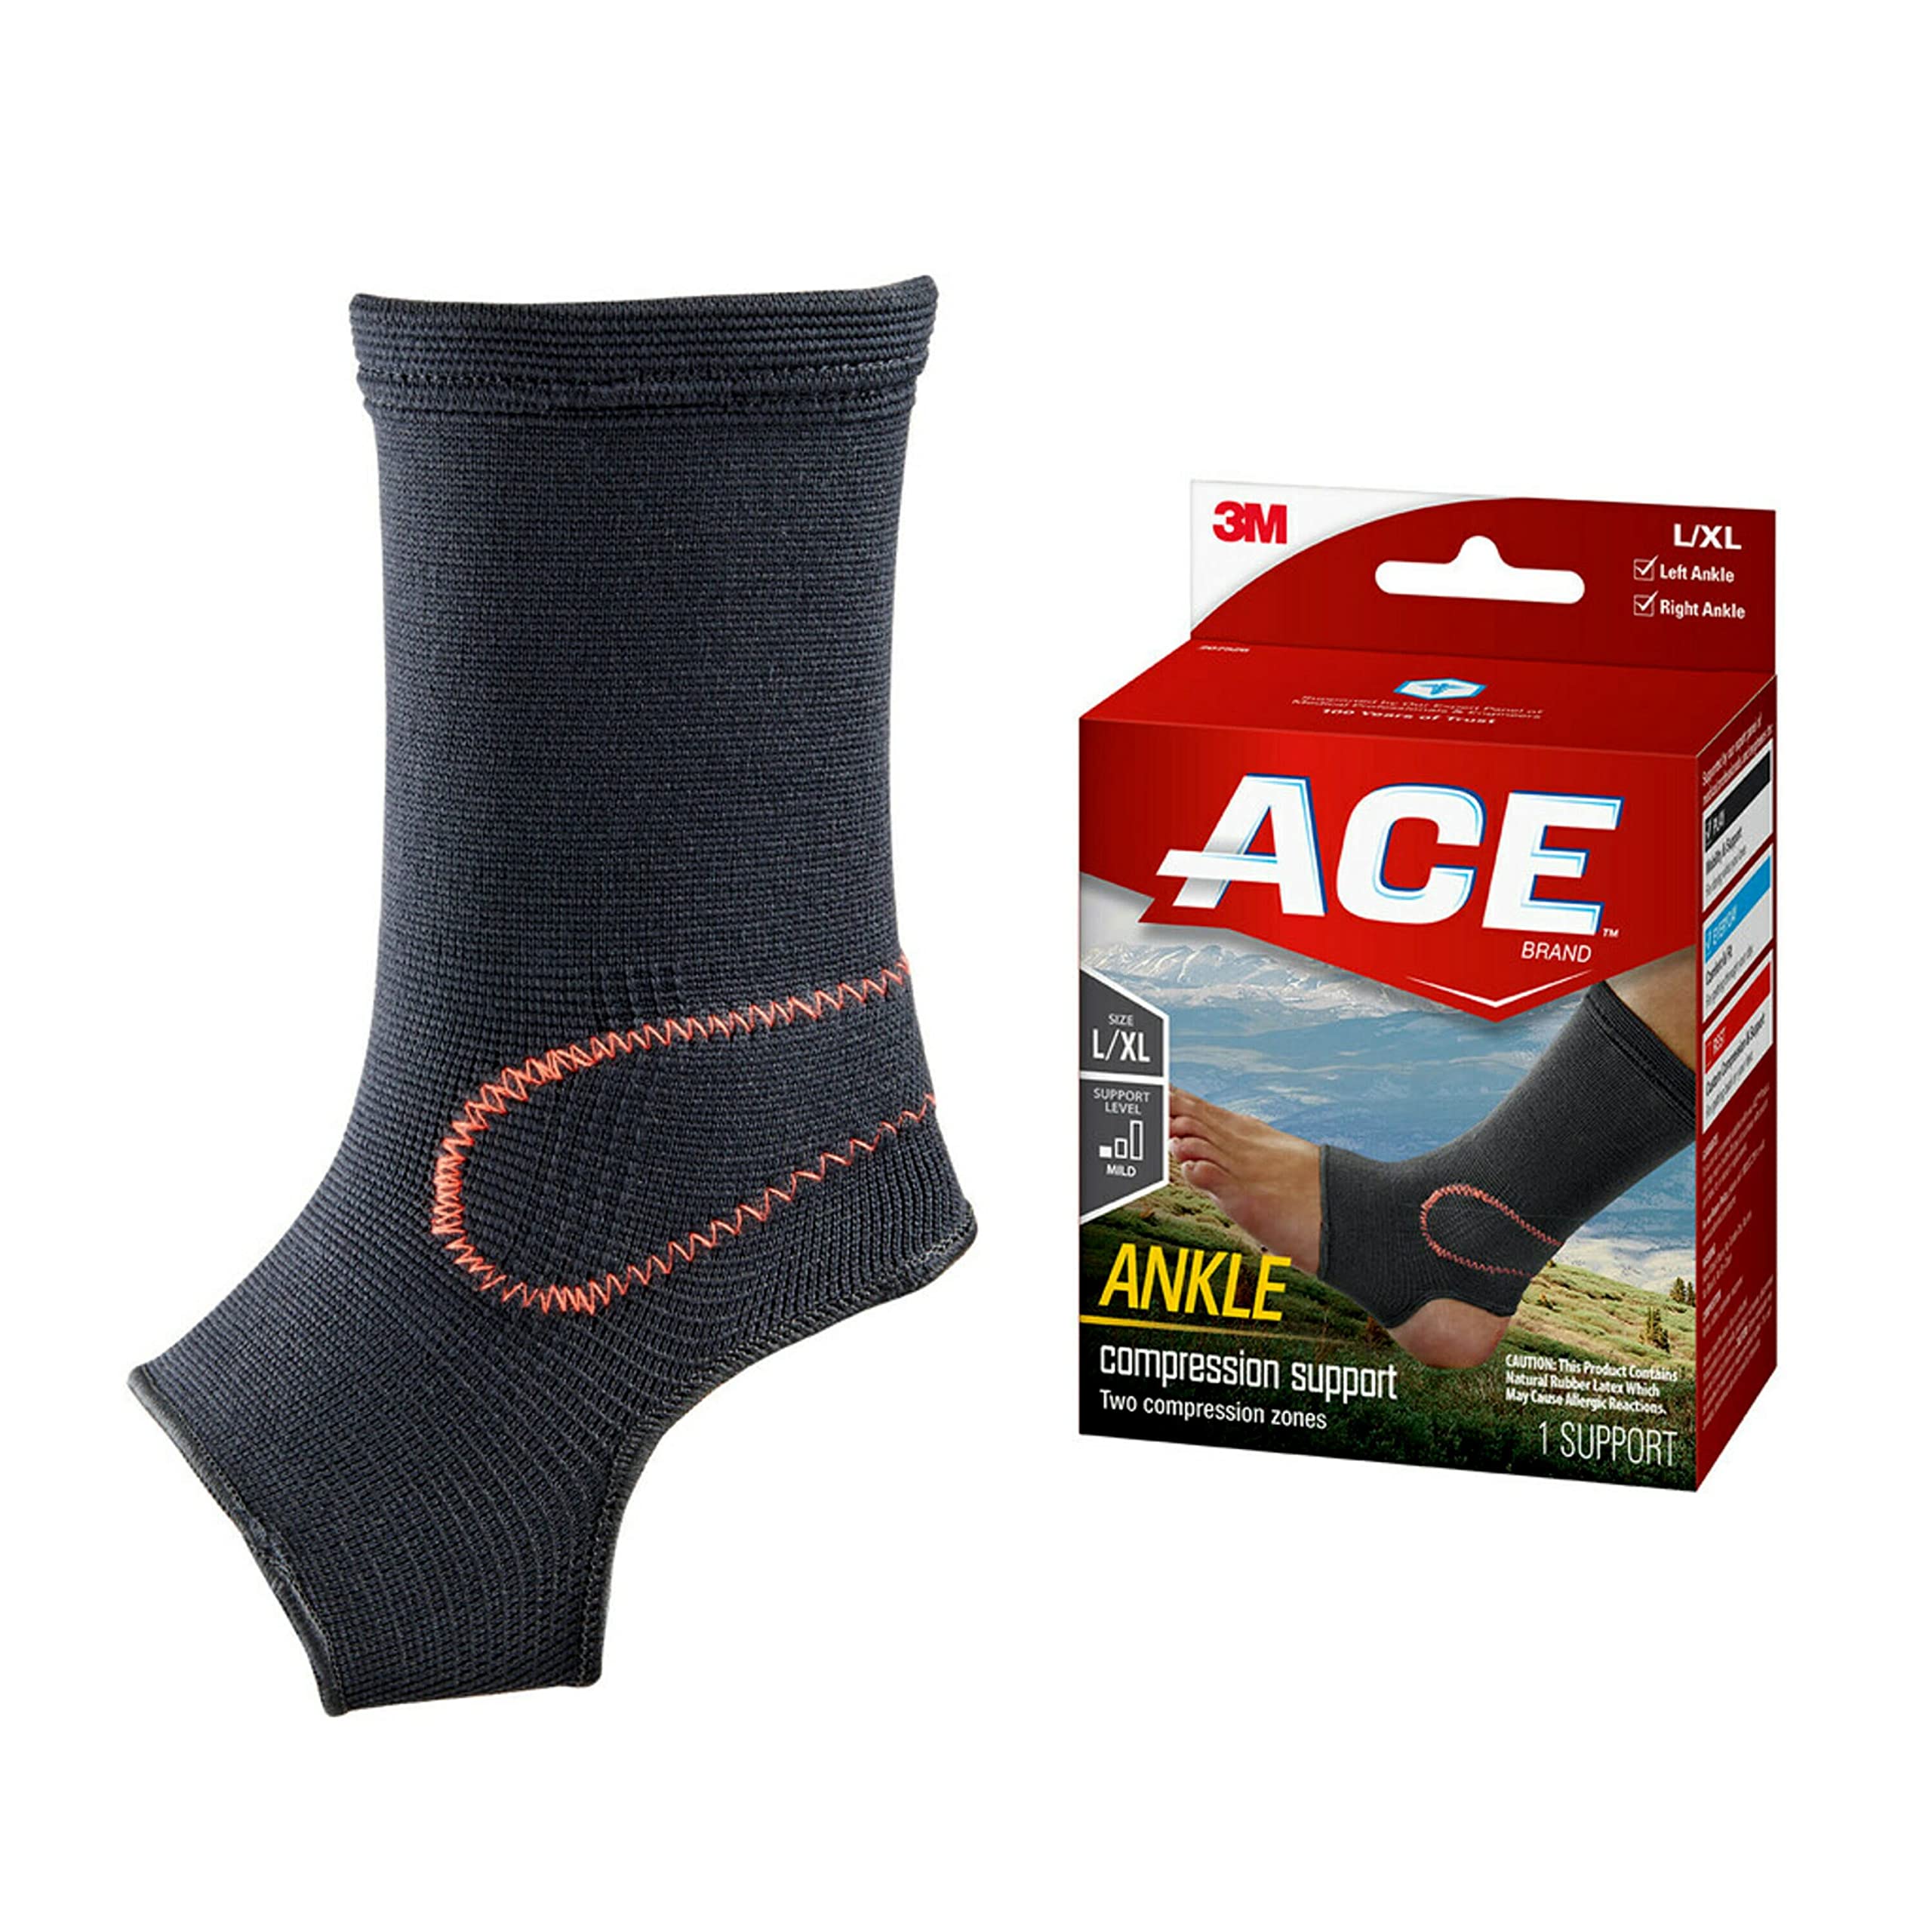 ACE Brand Compression Ankle Support, Large/X-Large, Black, 1/Pack